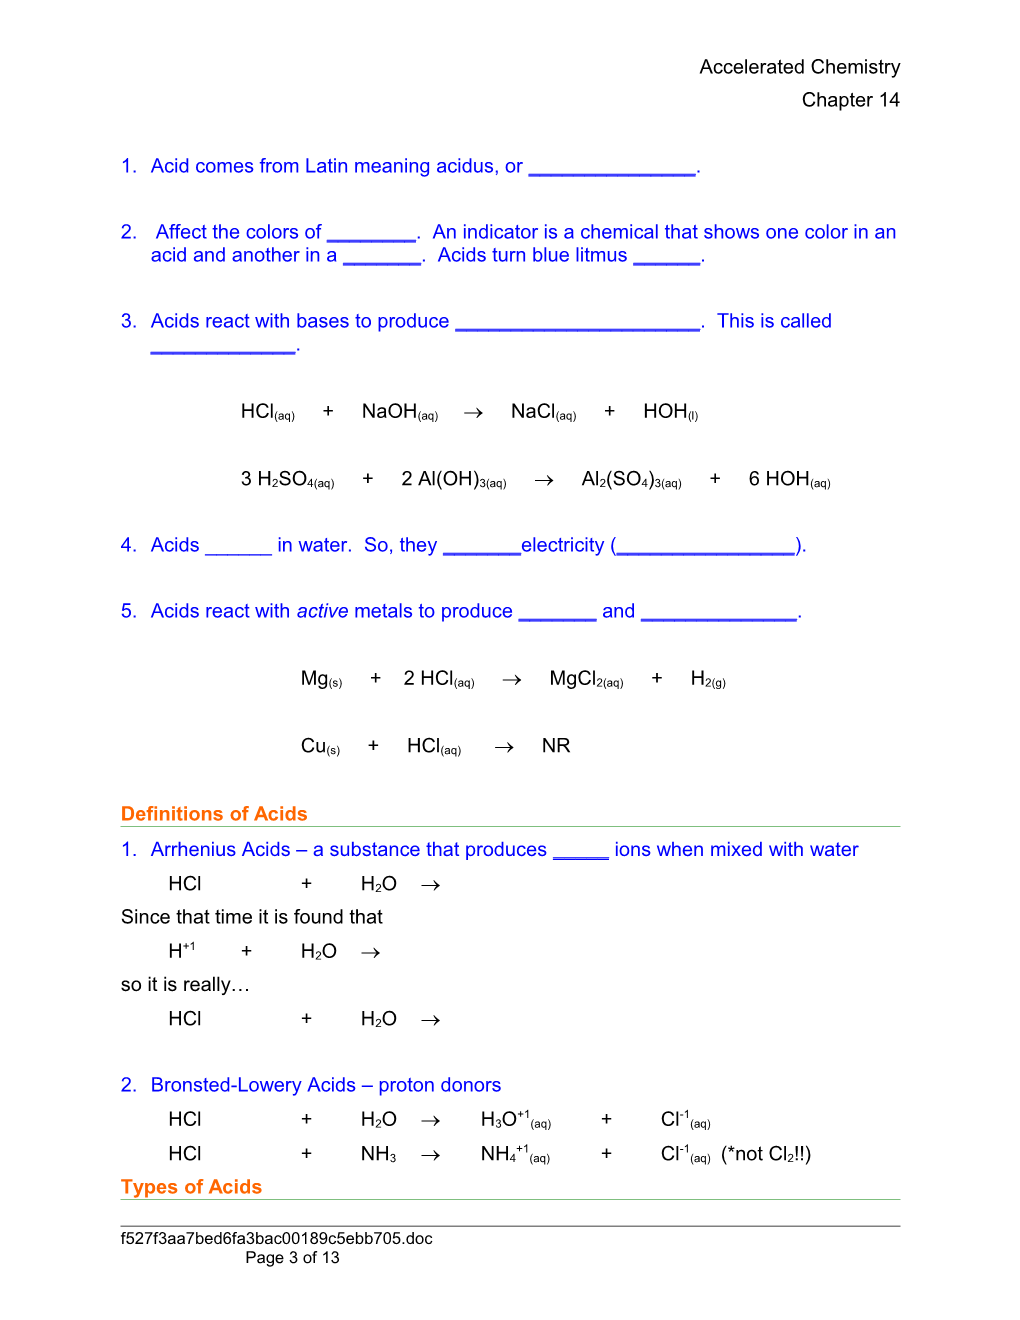 Accelerated Chemistry Chapter 14 Notes